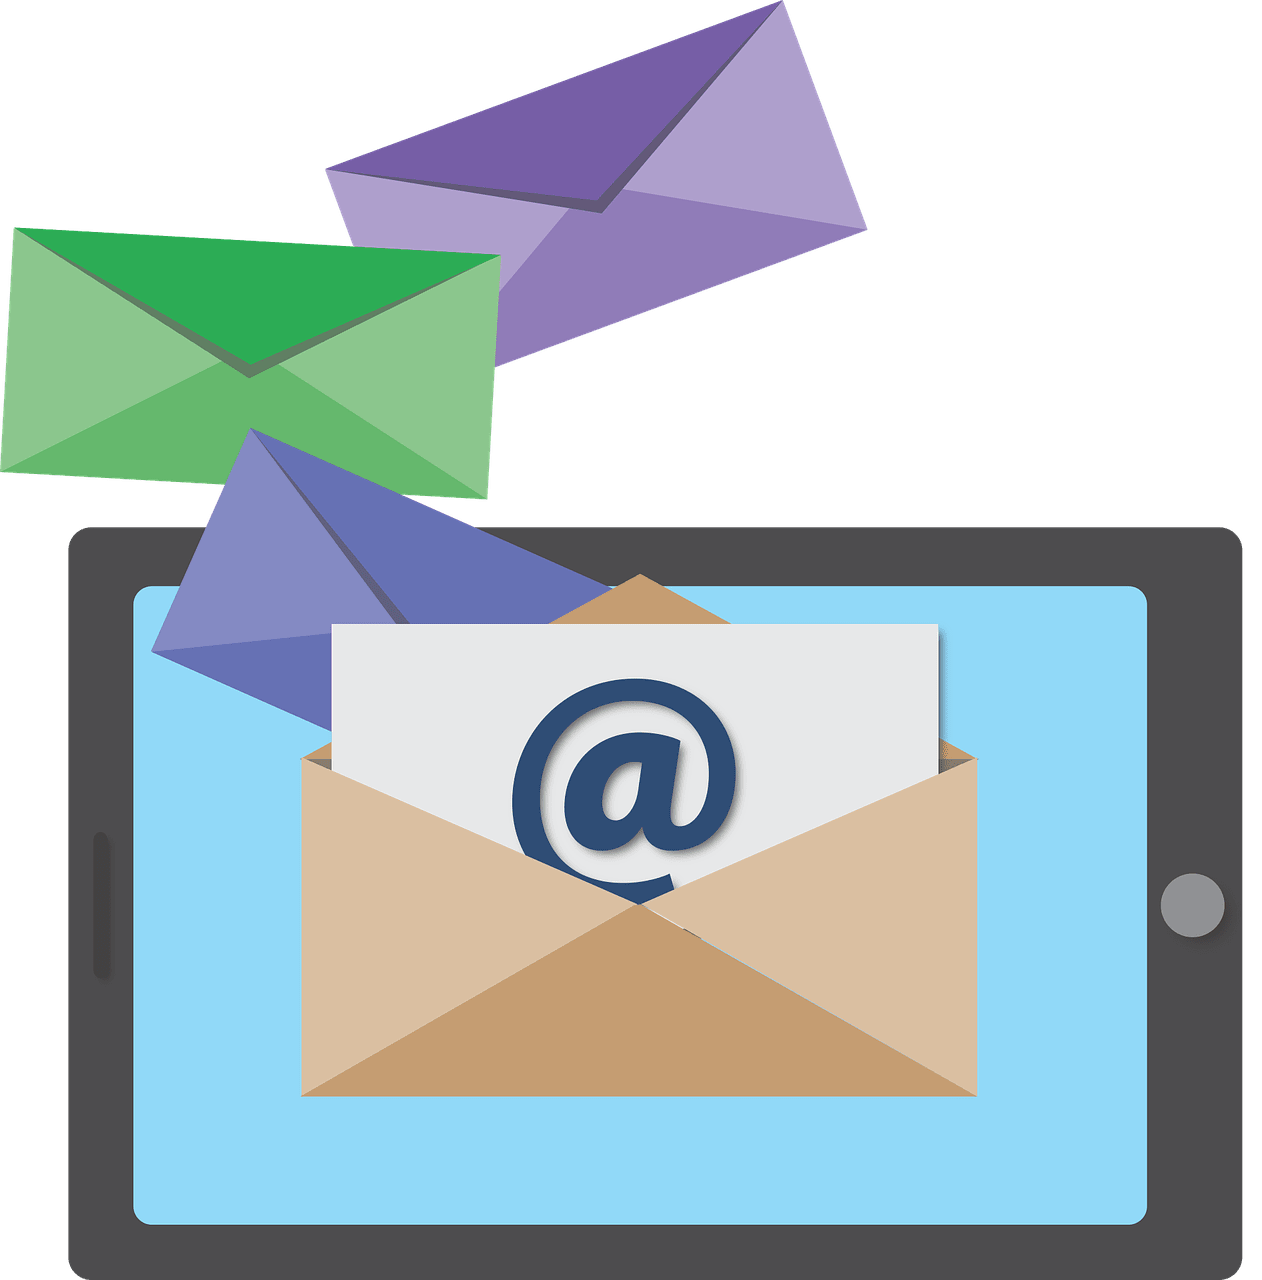 Should I be using a subdomain to send email?